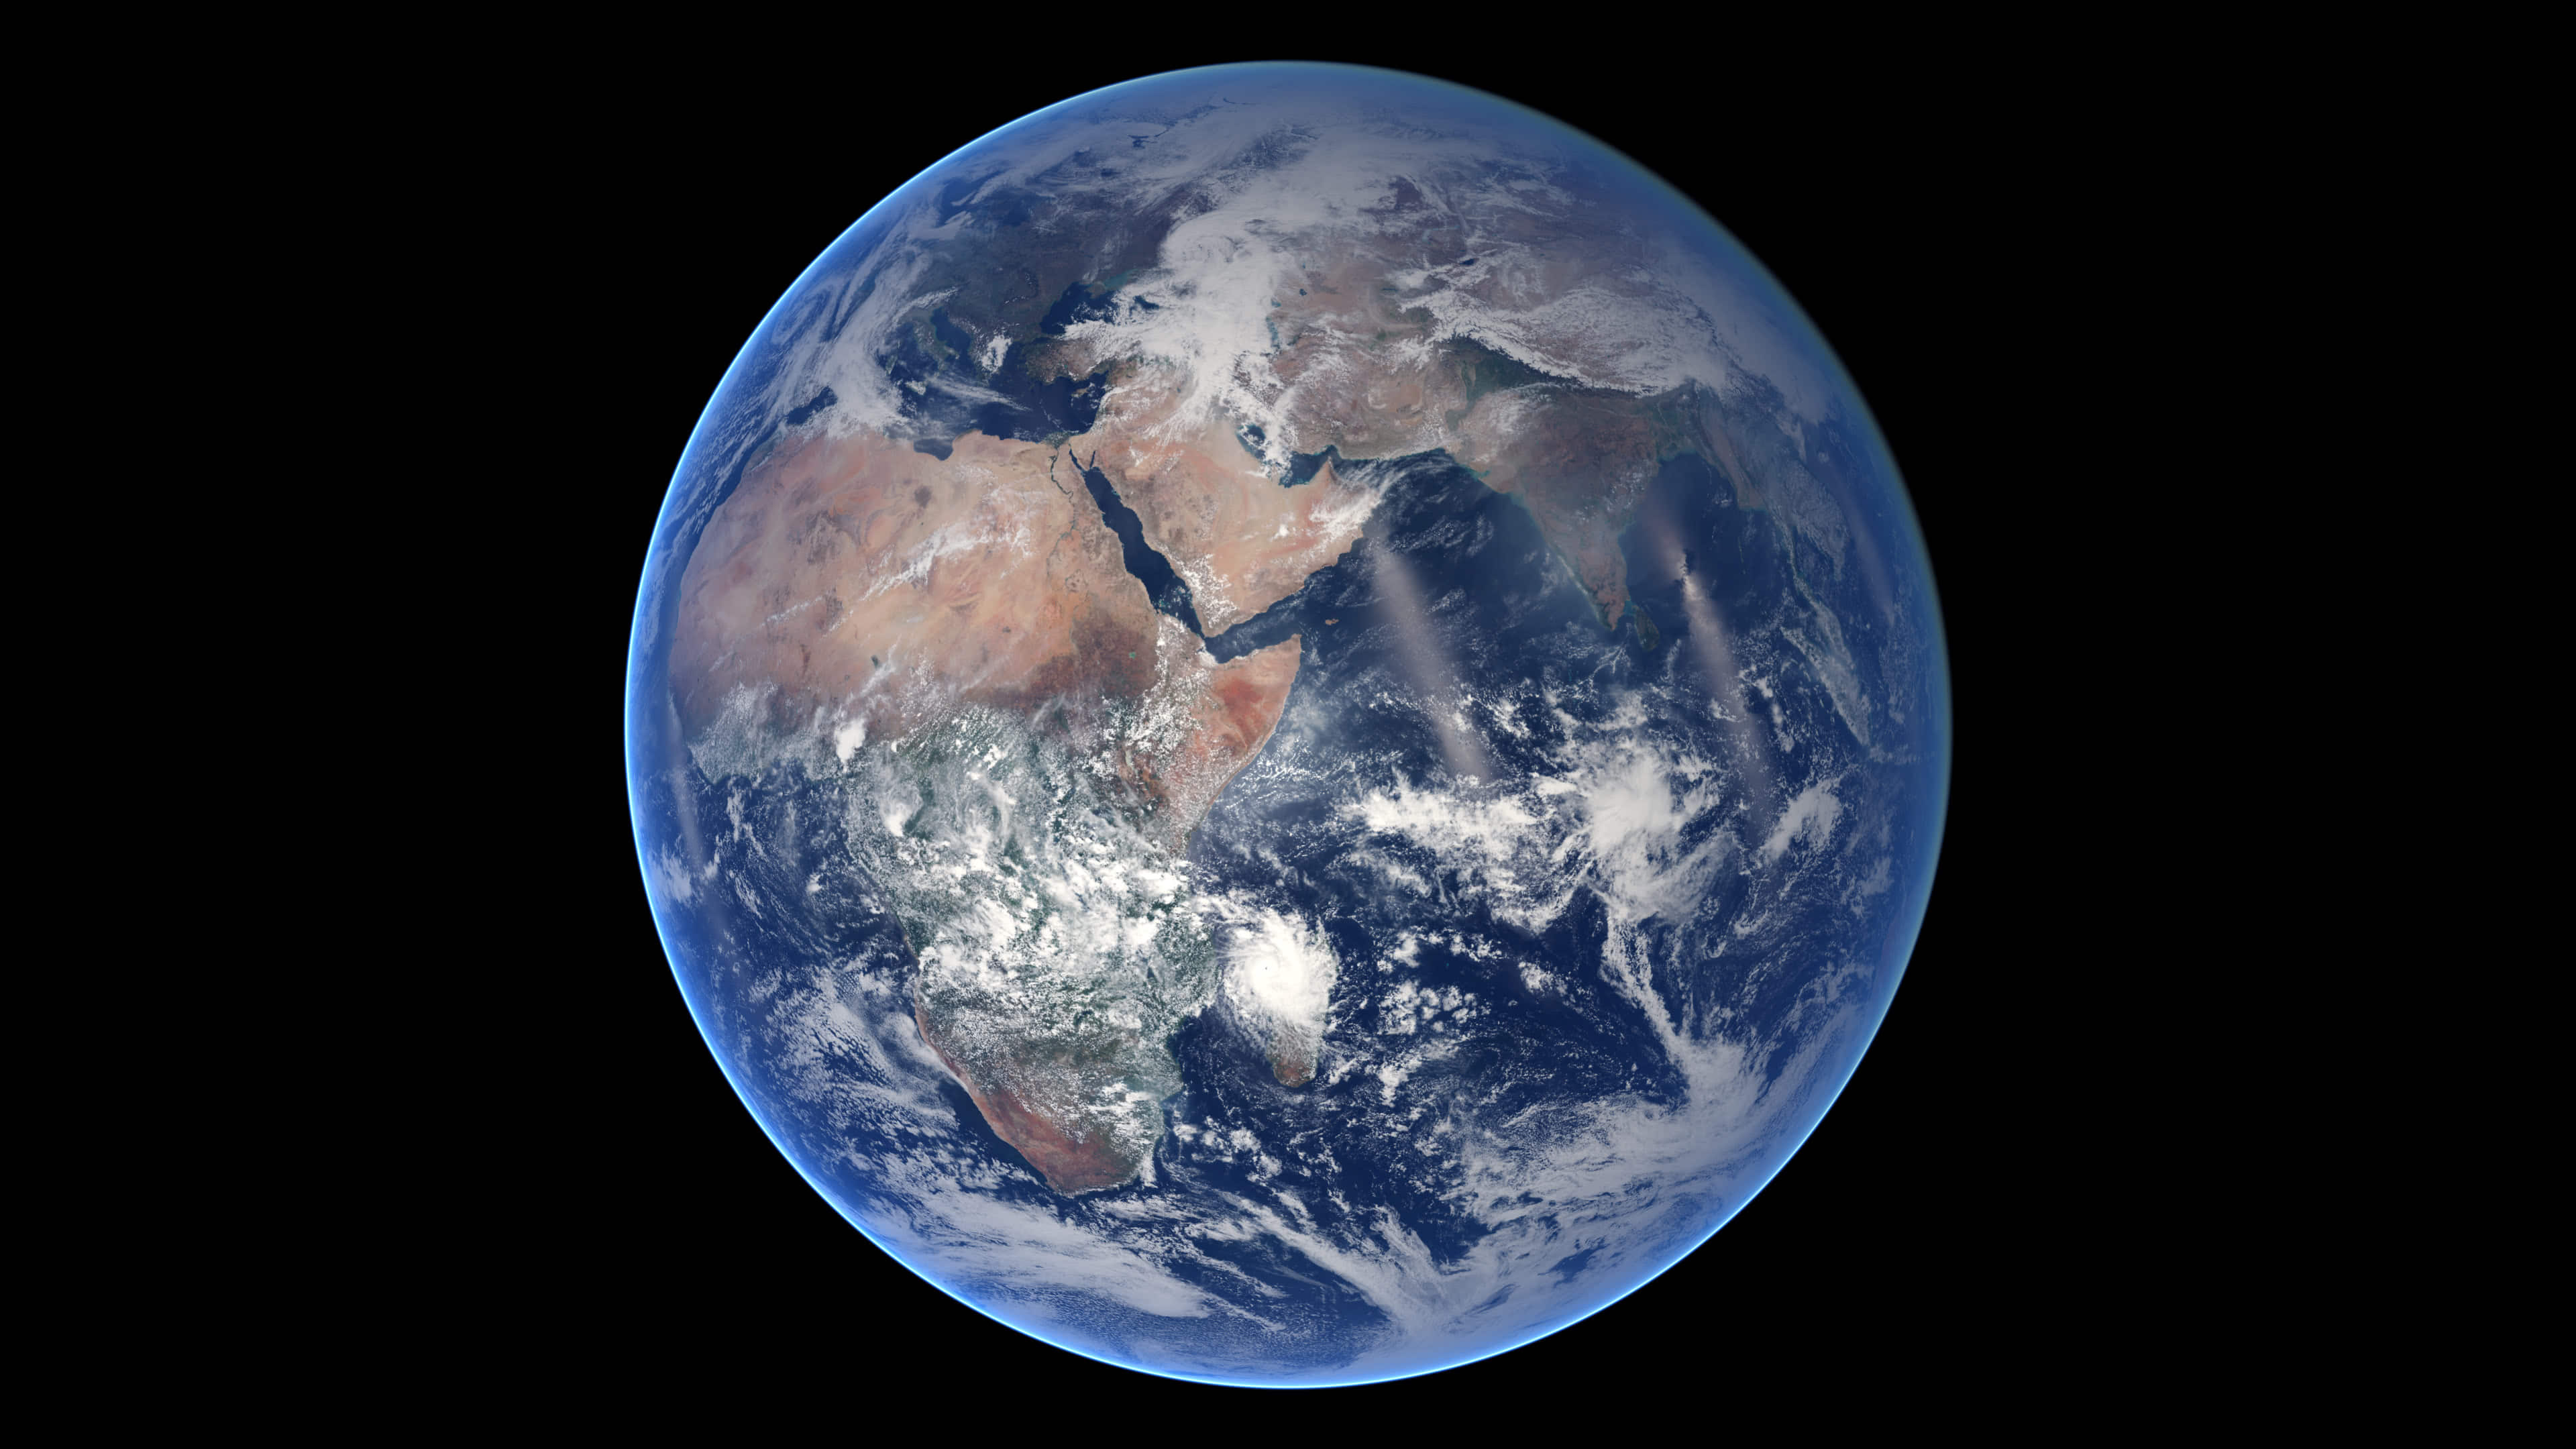 the blue marble spins-nasa portrait of earth 4k wallpaper